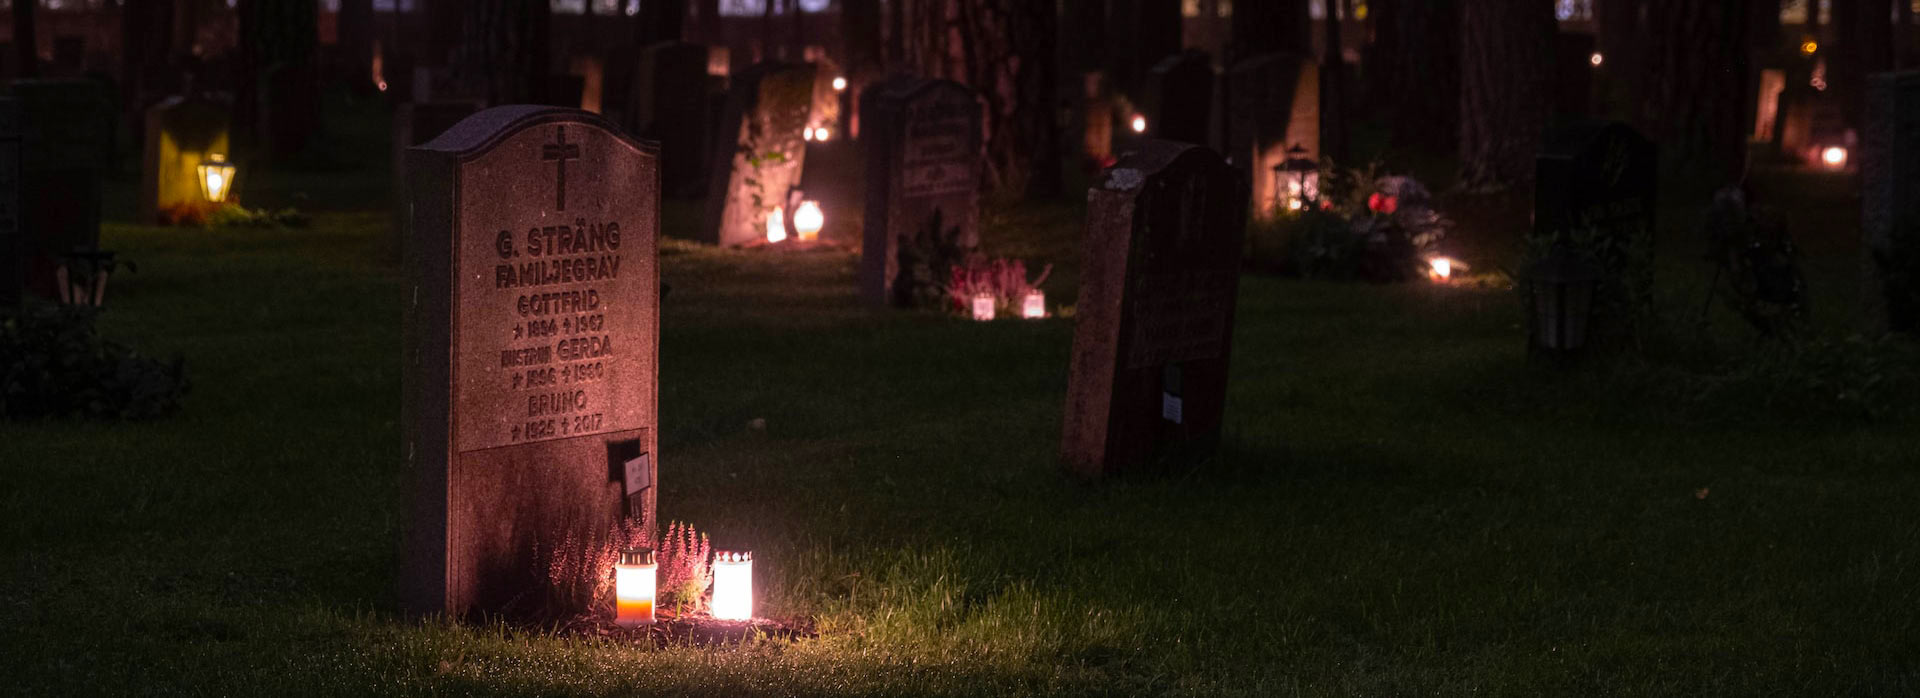 A graveyard at night lit with candles